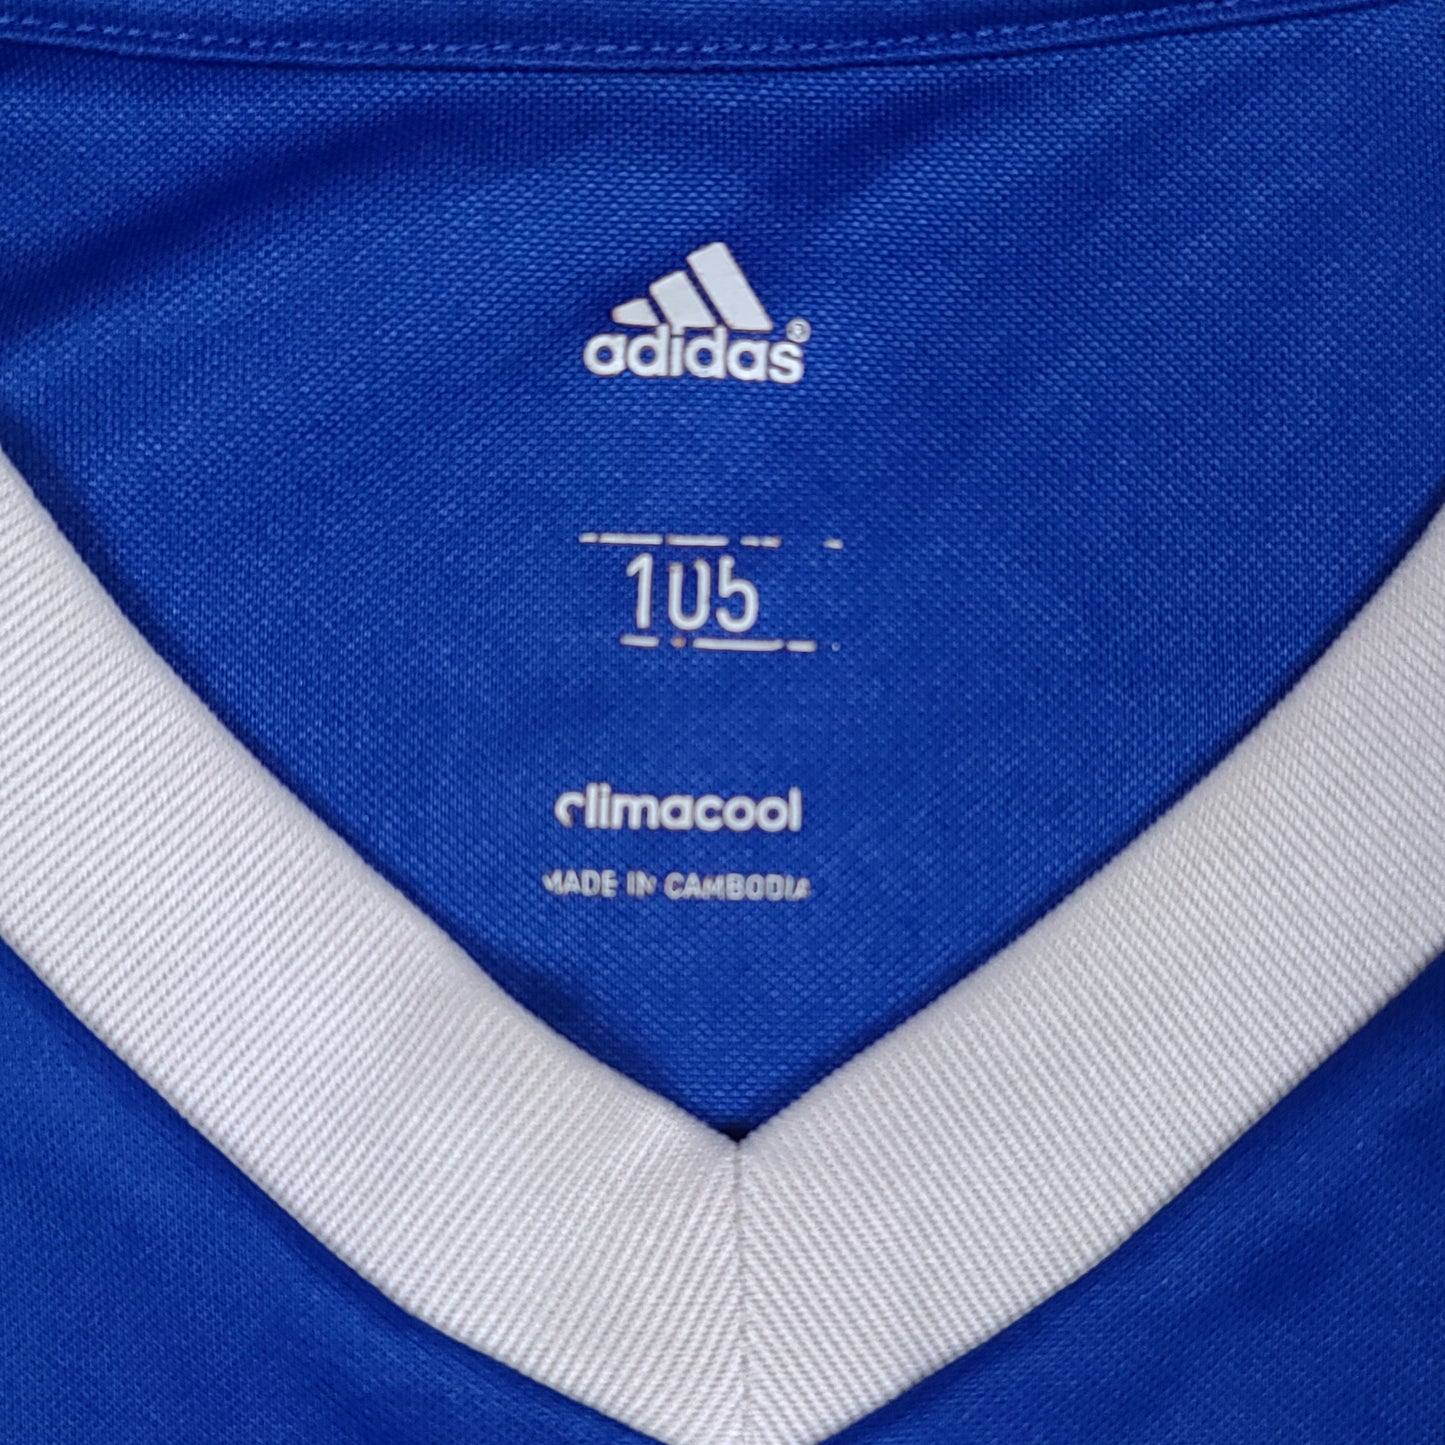 Argentina Blue adidas Climacool Soccer Jersey